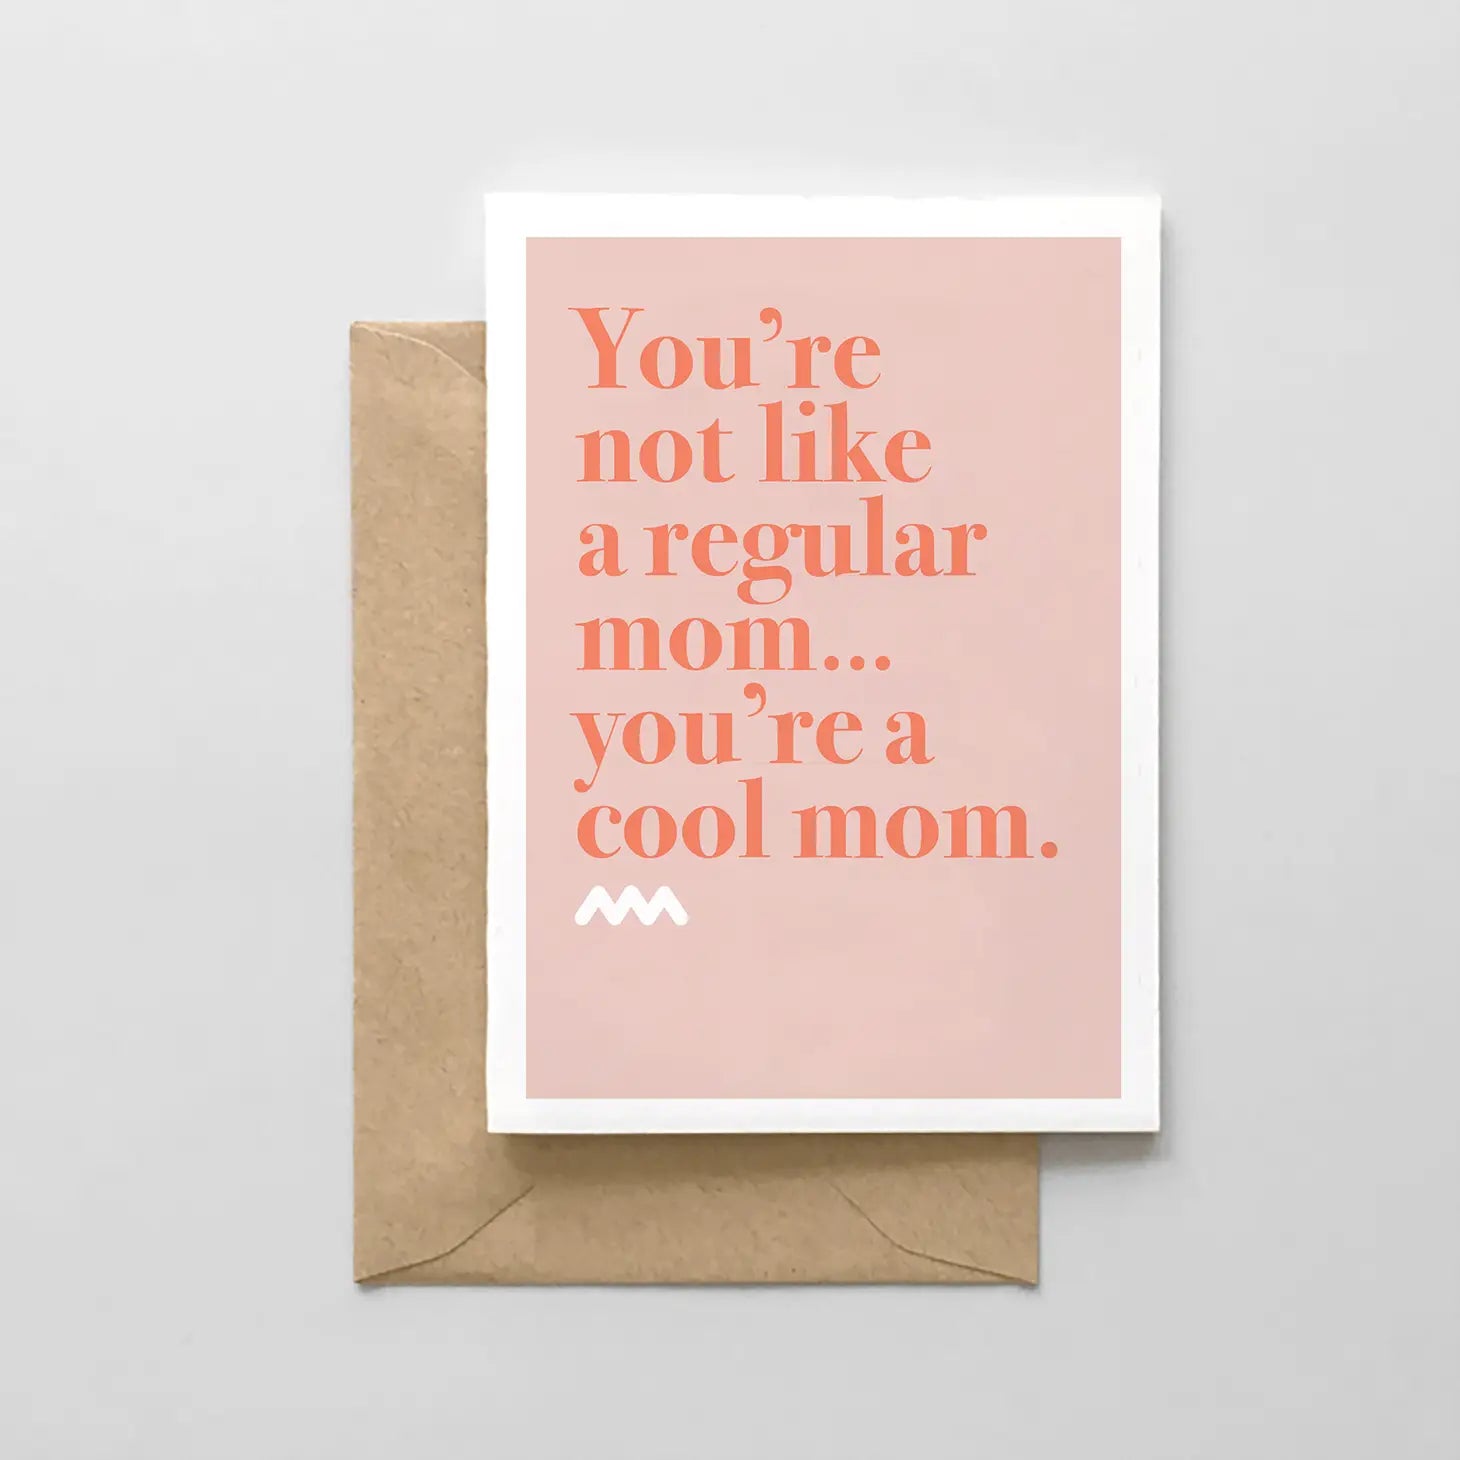 You're Not a Regular Mom, You're a Cool Mom Card